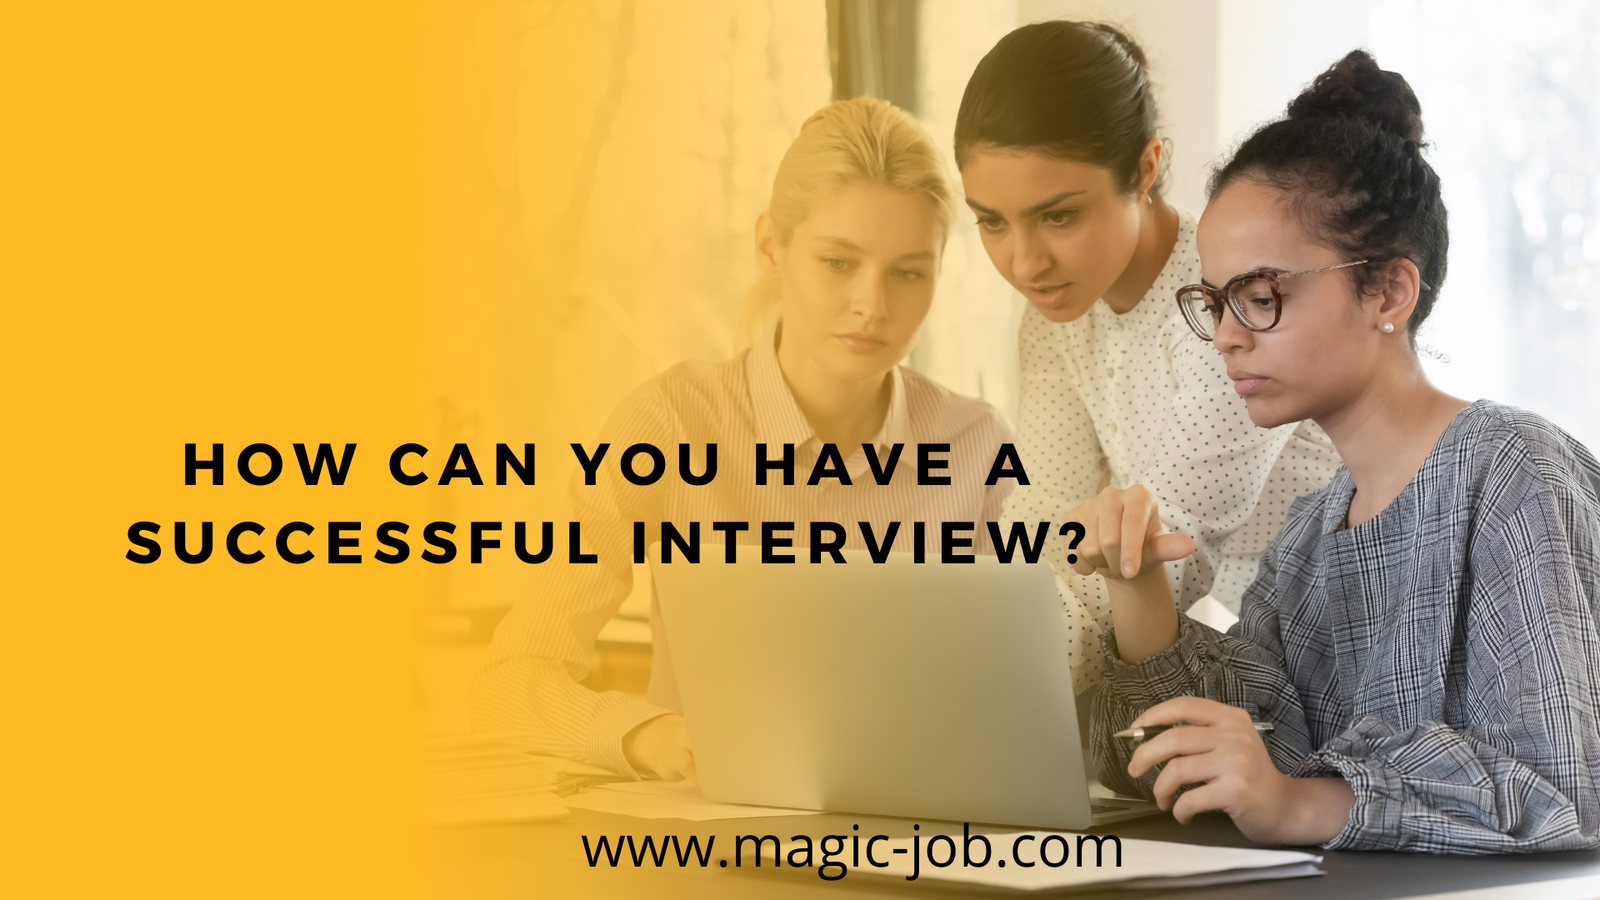 How Can You Have a Successful Interview? image